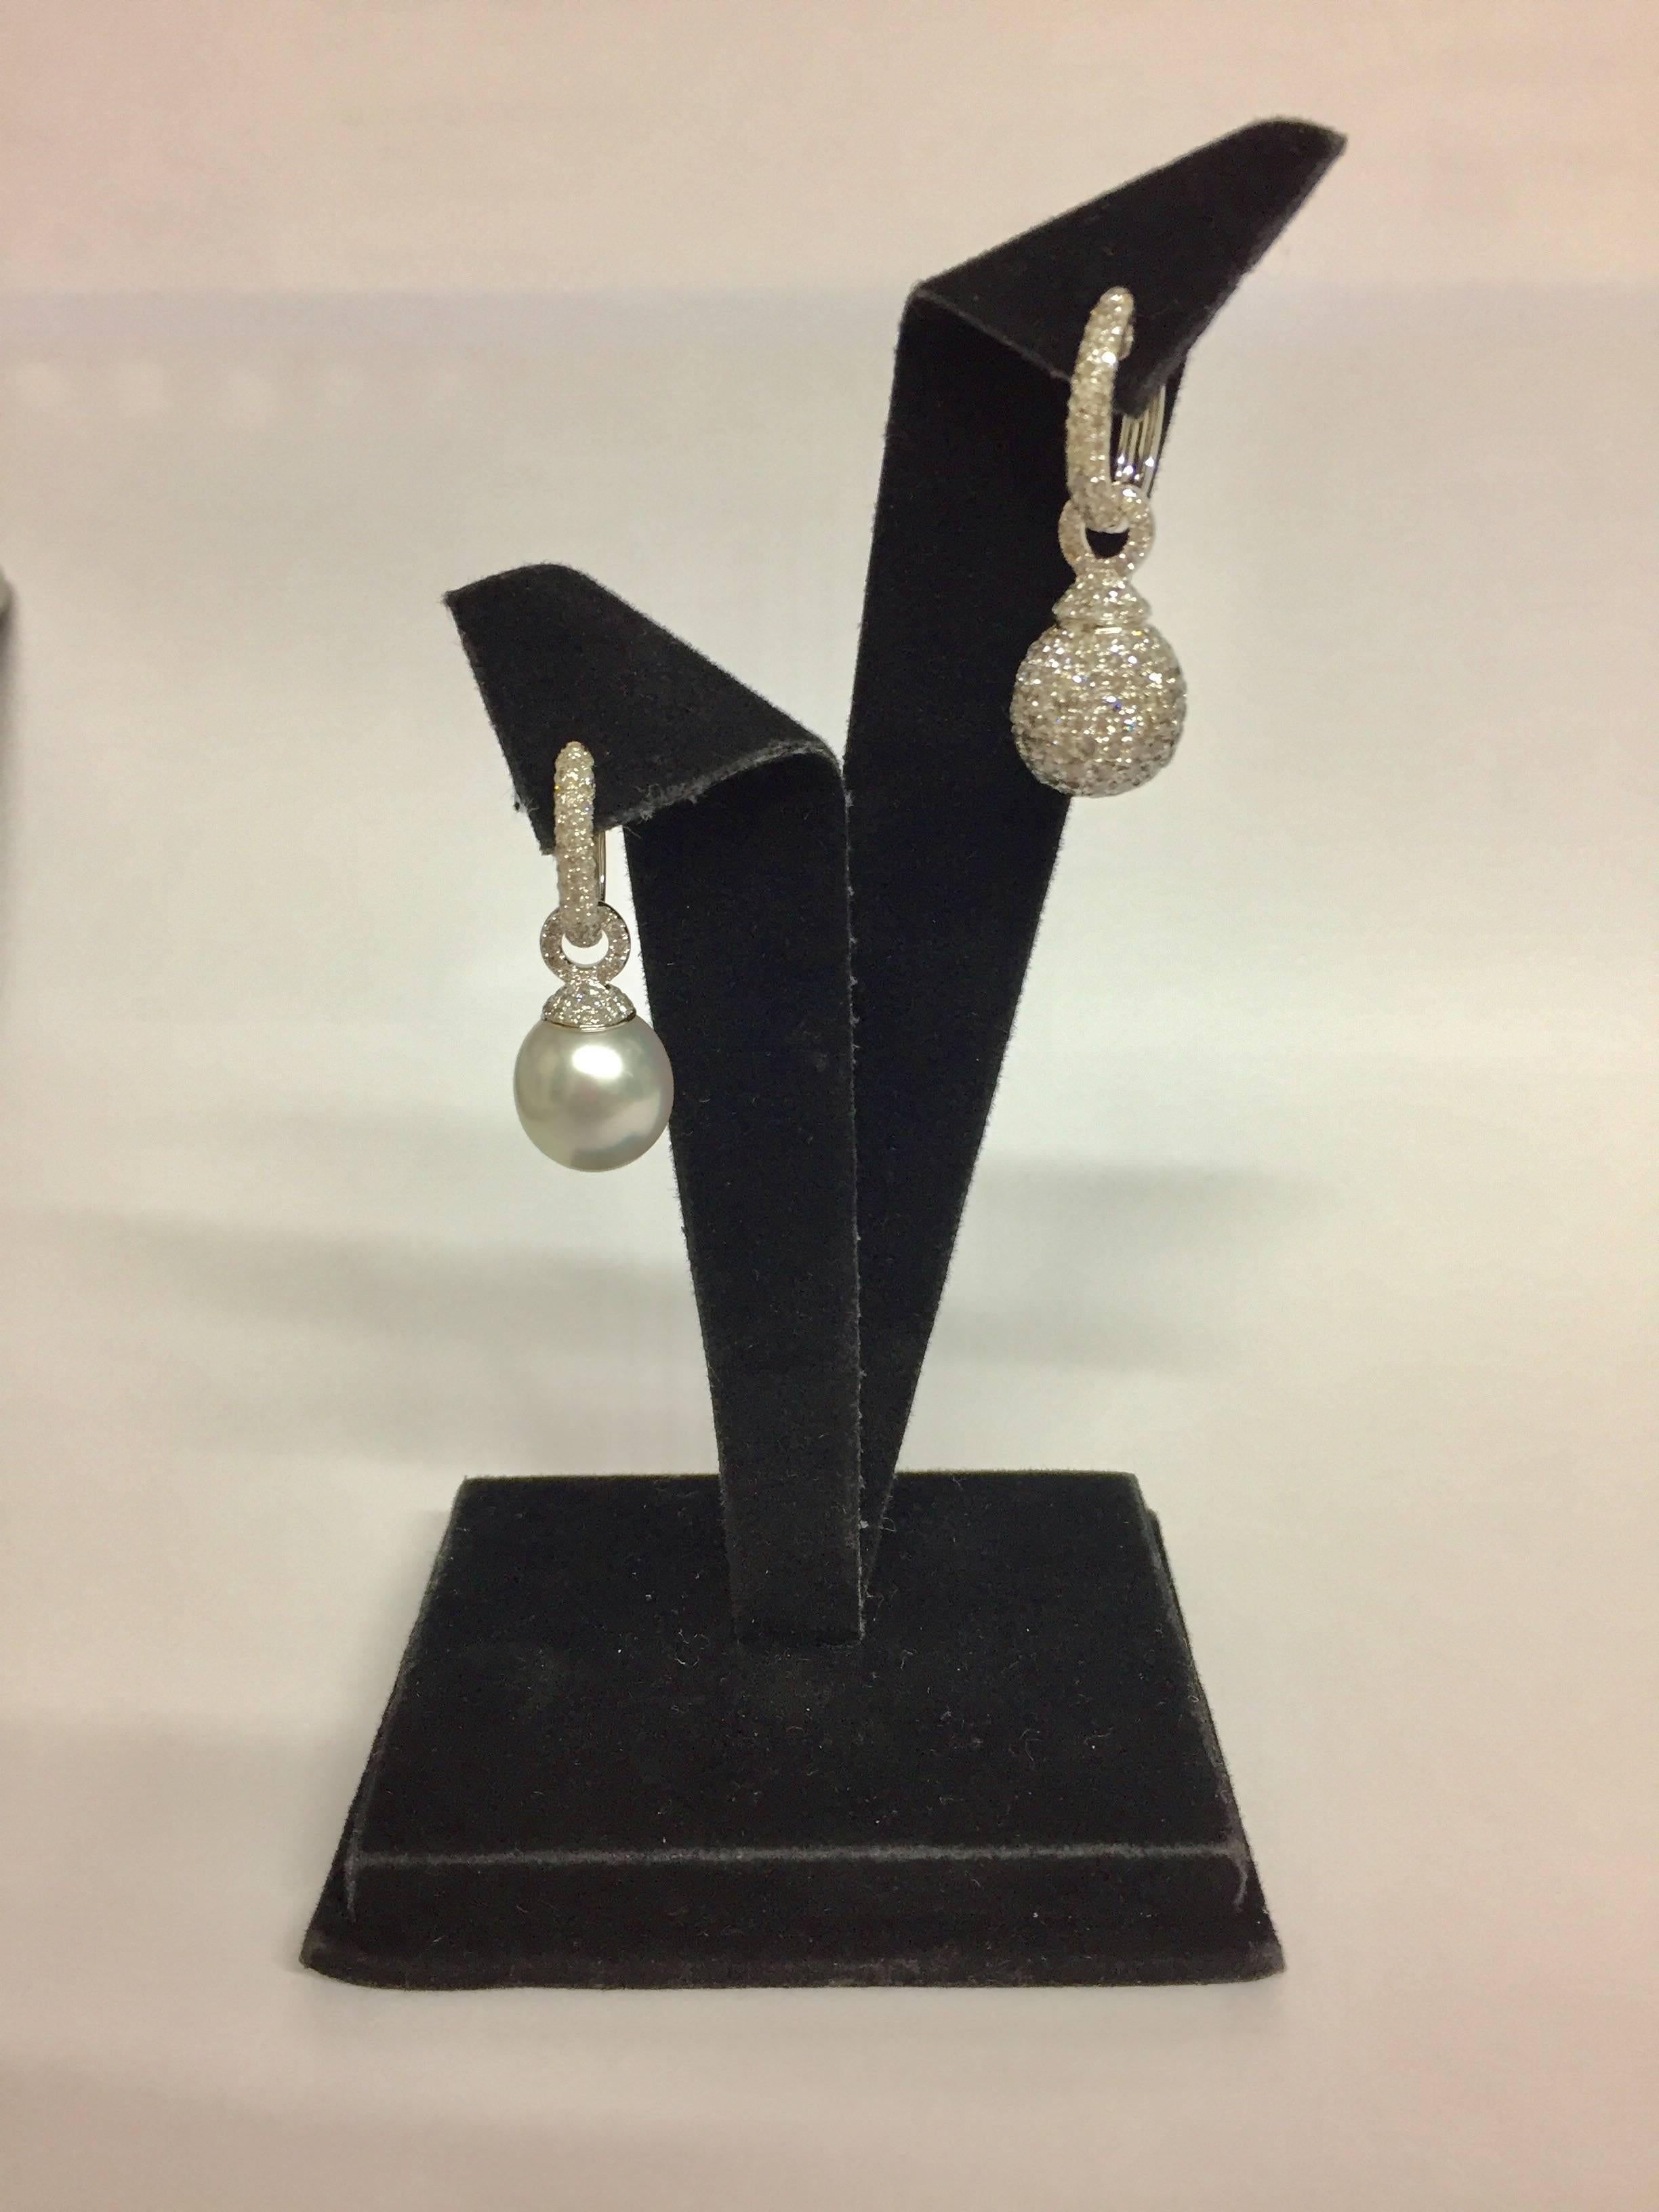 Earrings with 1 piece 13mm white south sea pearl and 315 pieces grey diamonds (3.59 carats). 18K white gold.